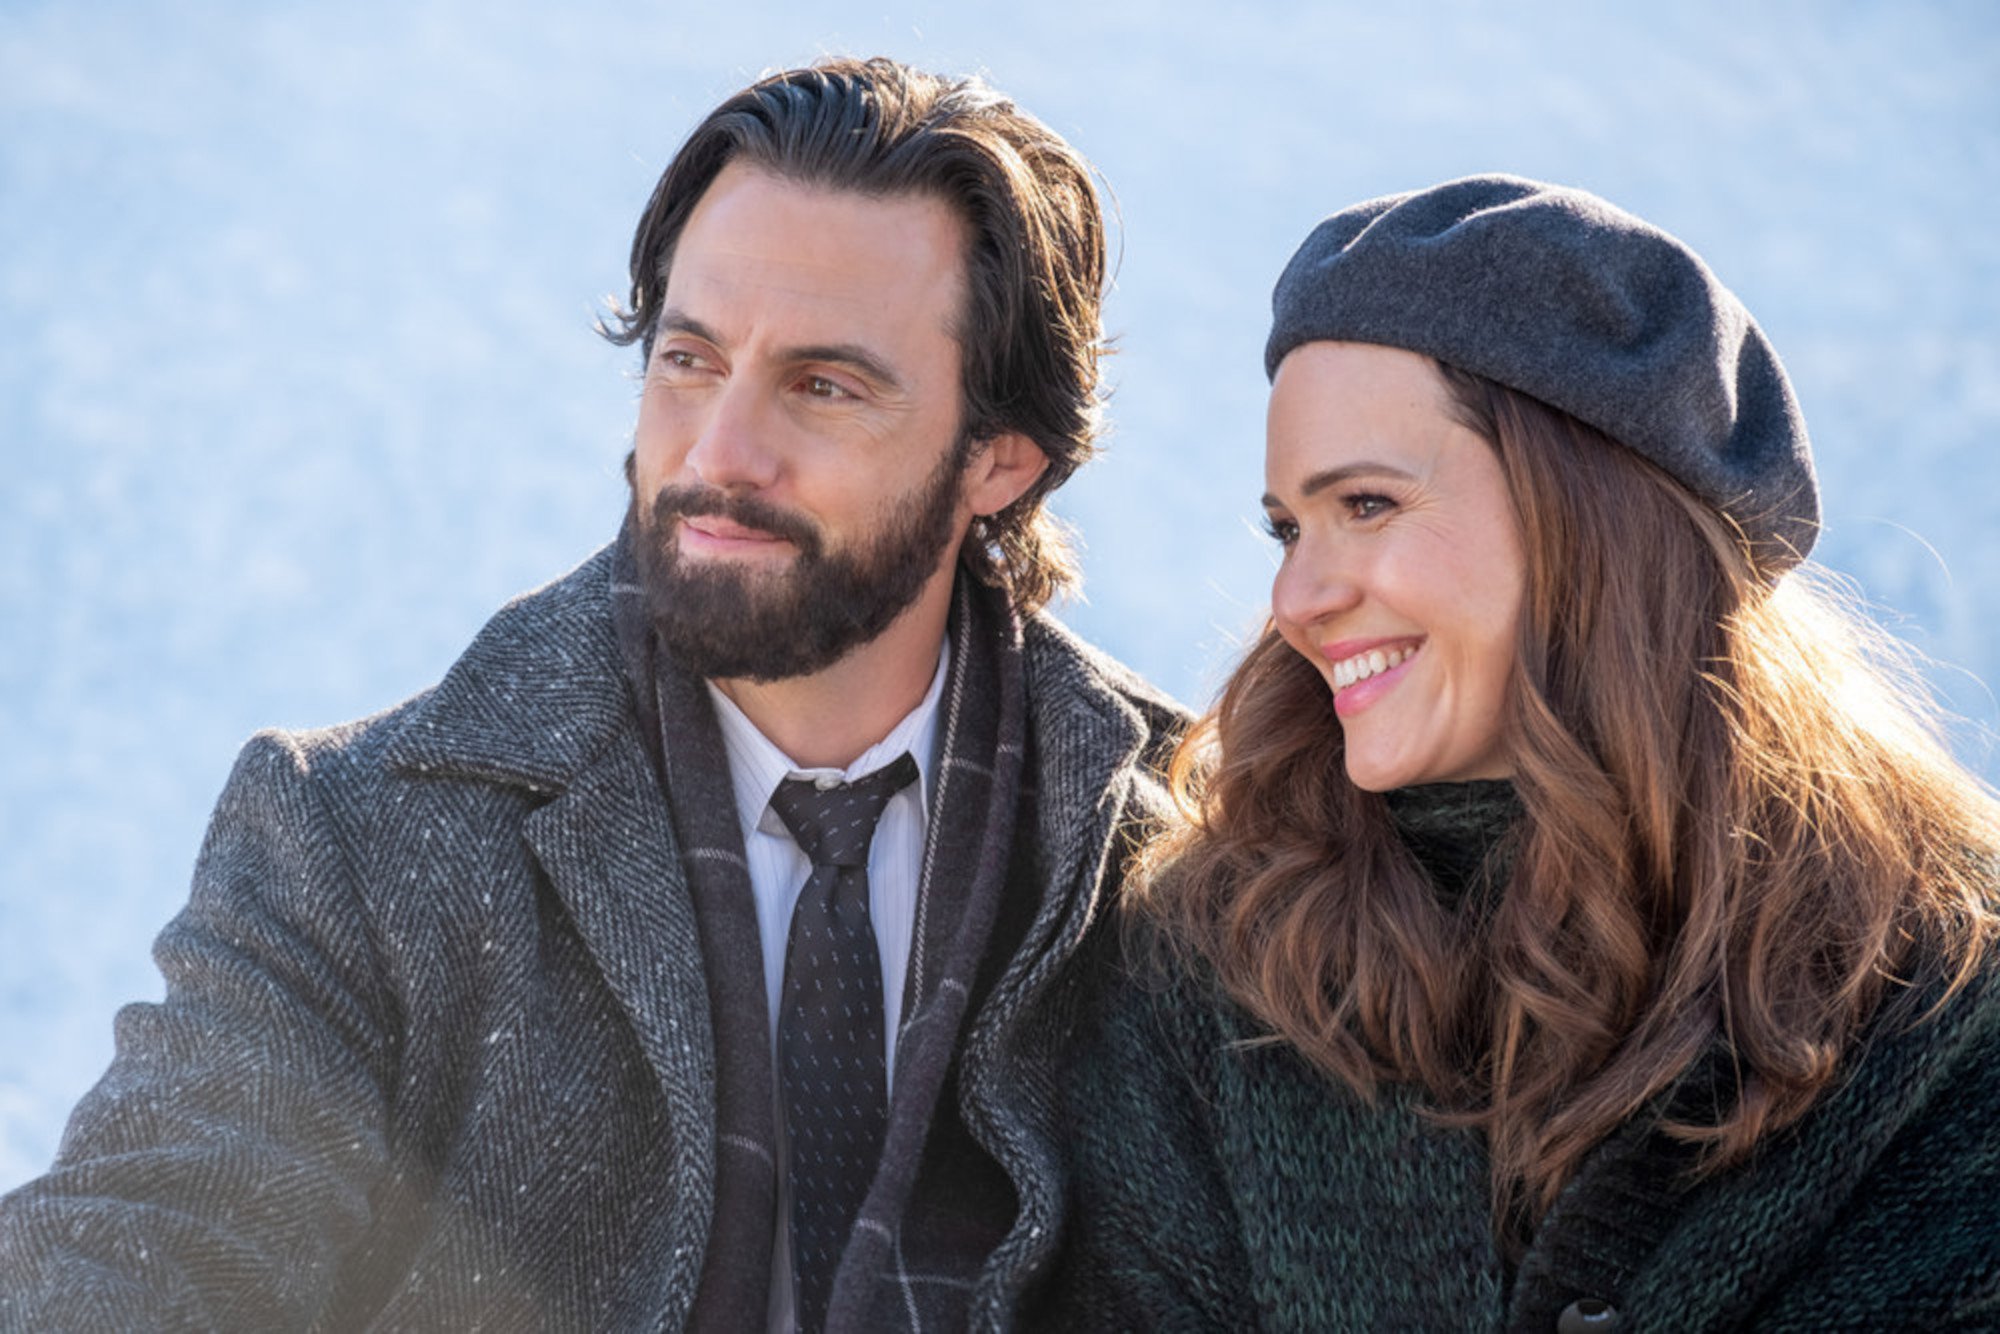 Milo Ventimiglia and Mandy Moore, both of whom would love to do a 'This Is Us' reunion movie. In the photo, they're wearing coats in the snow. Moore is also wearing a gray hat.